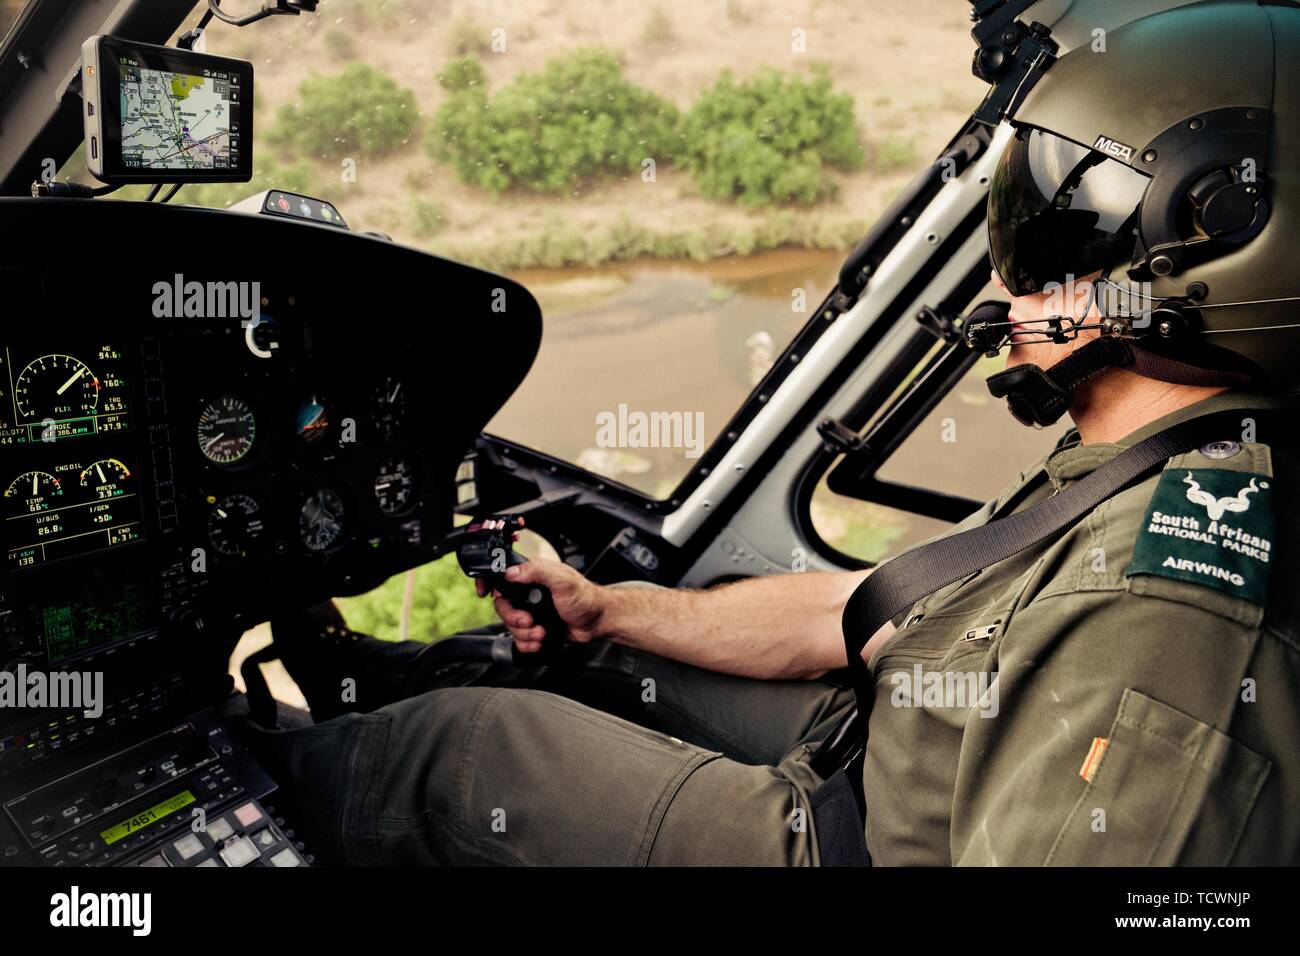 Helicopter pilot monitors poaching, Kruger National Park, South Africa Stock Photo